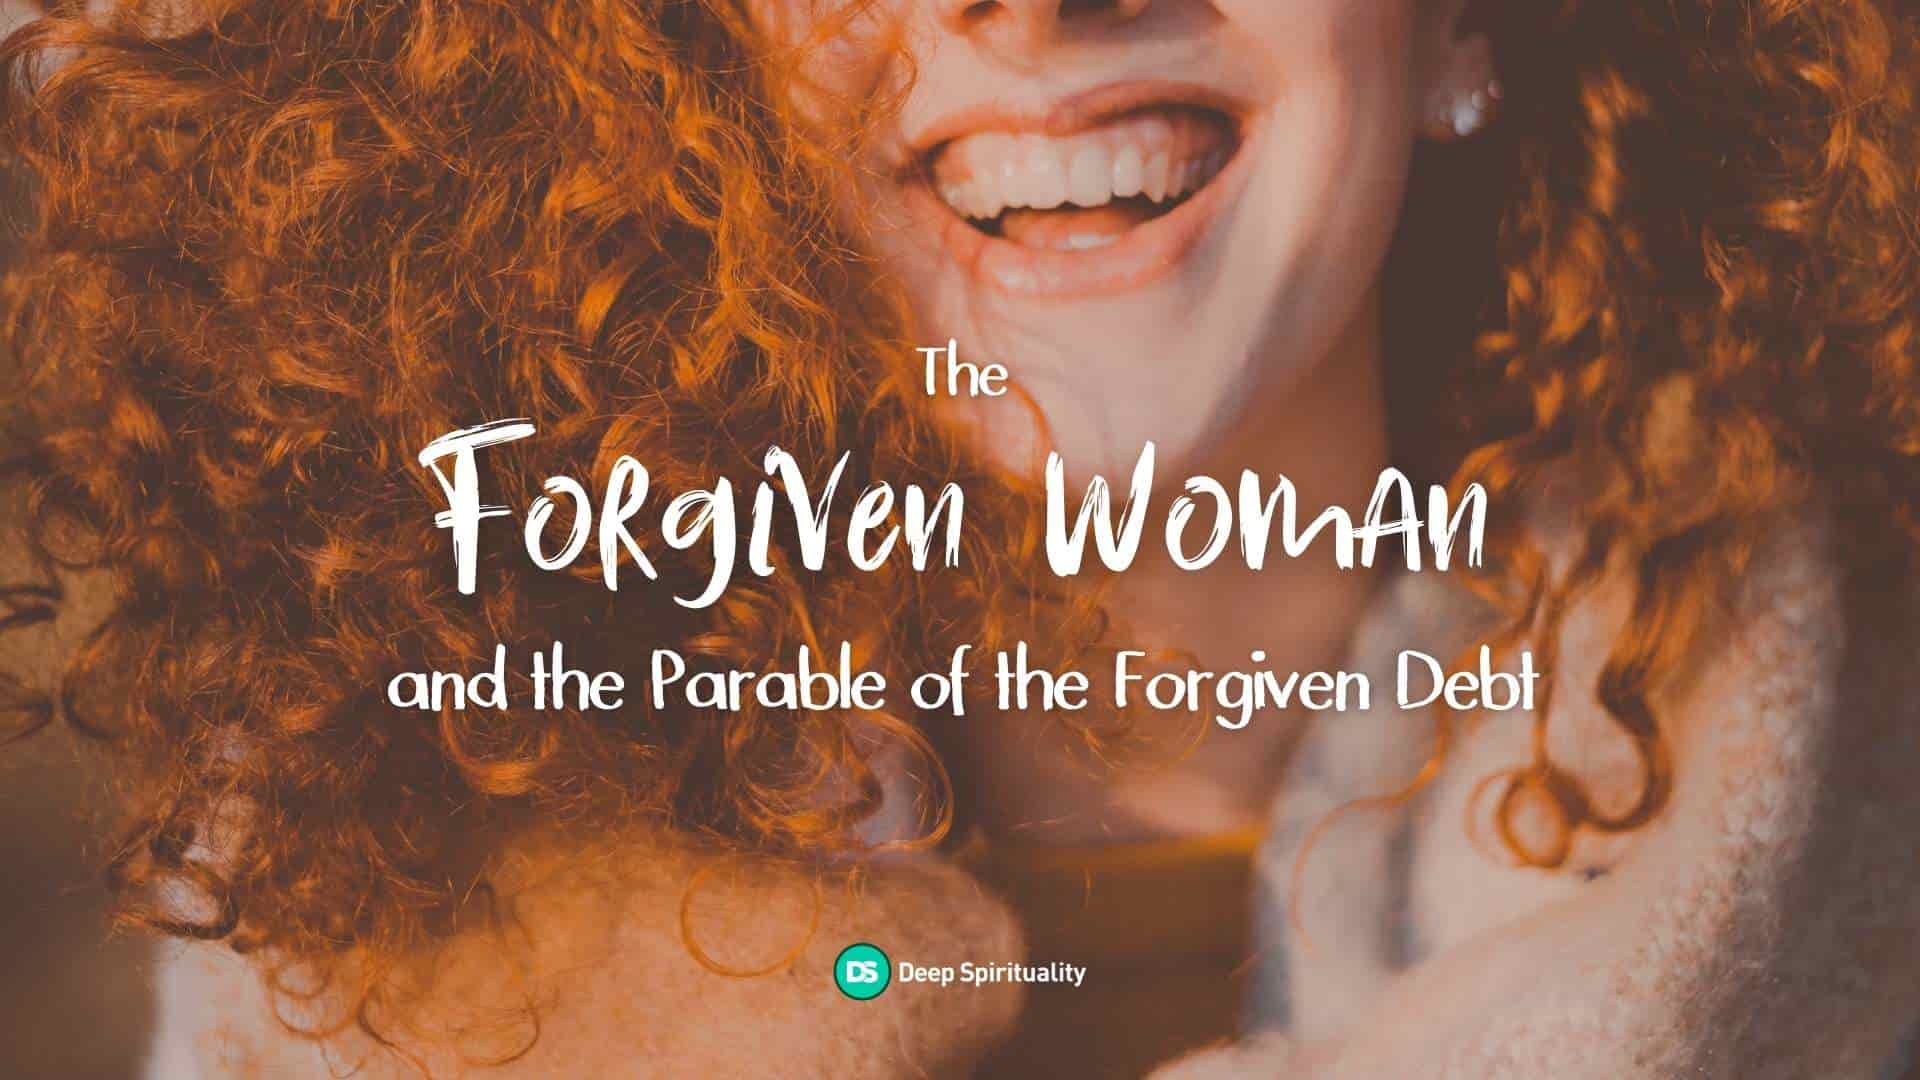 The Forgiven Woman and the Parable of the Forgiven Debt: How God’s Love Becomes Personal 4